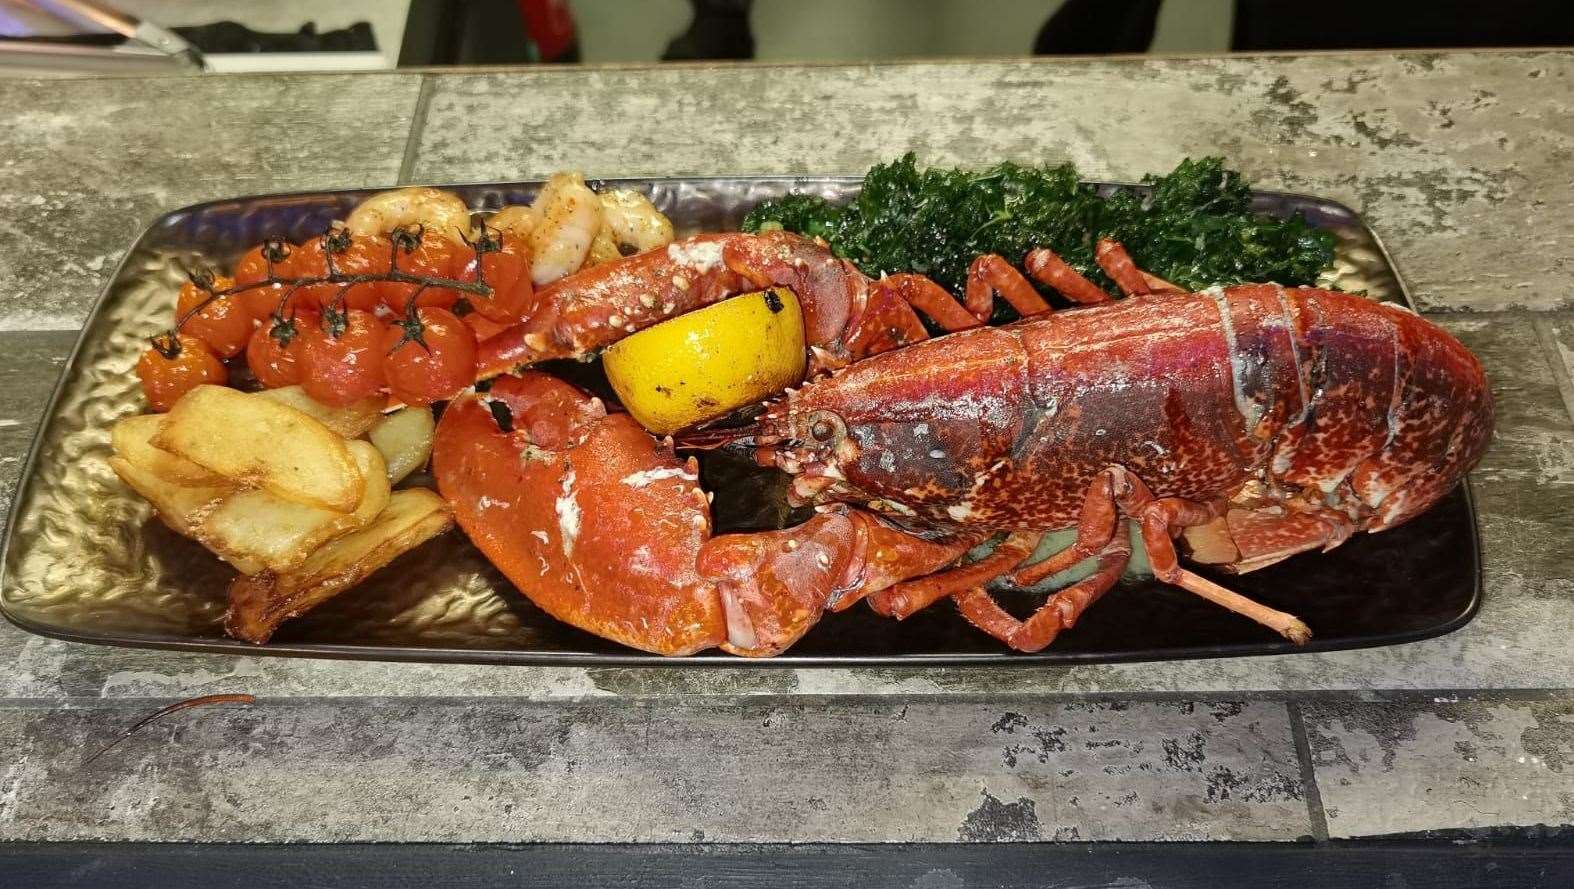 Lobster is one of the many items available on the menu